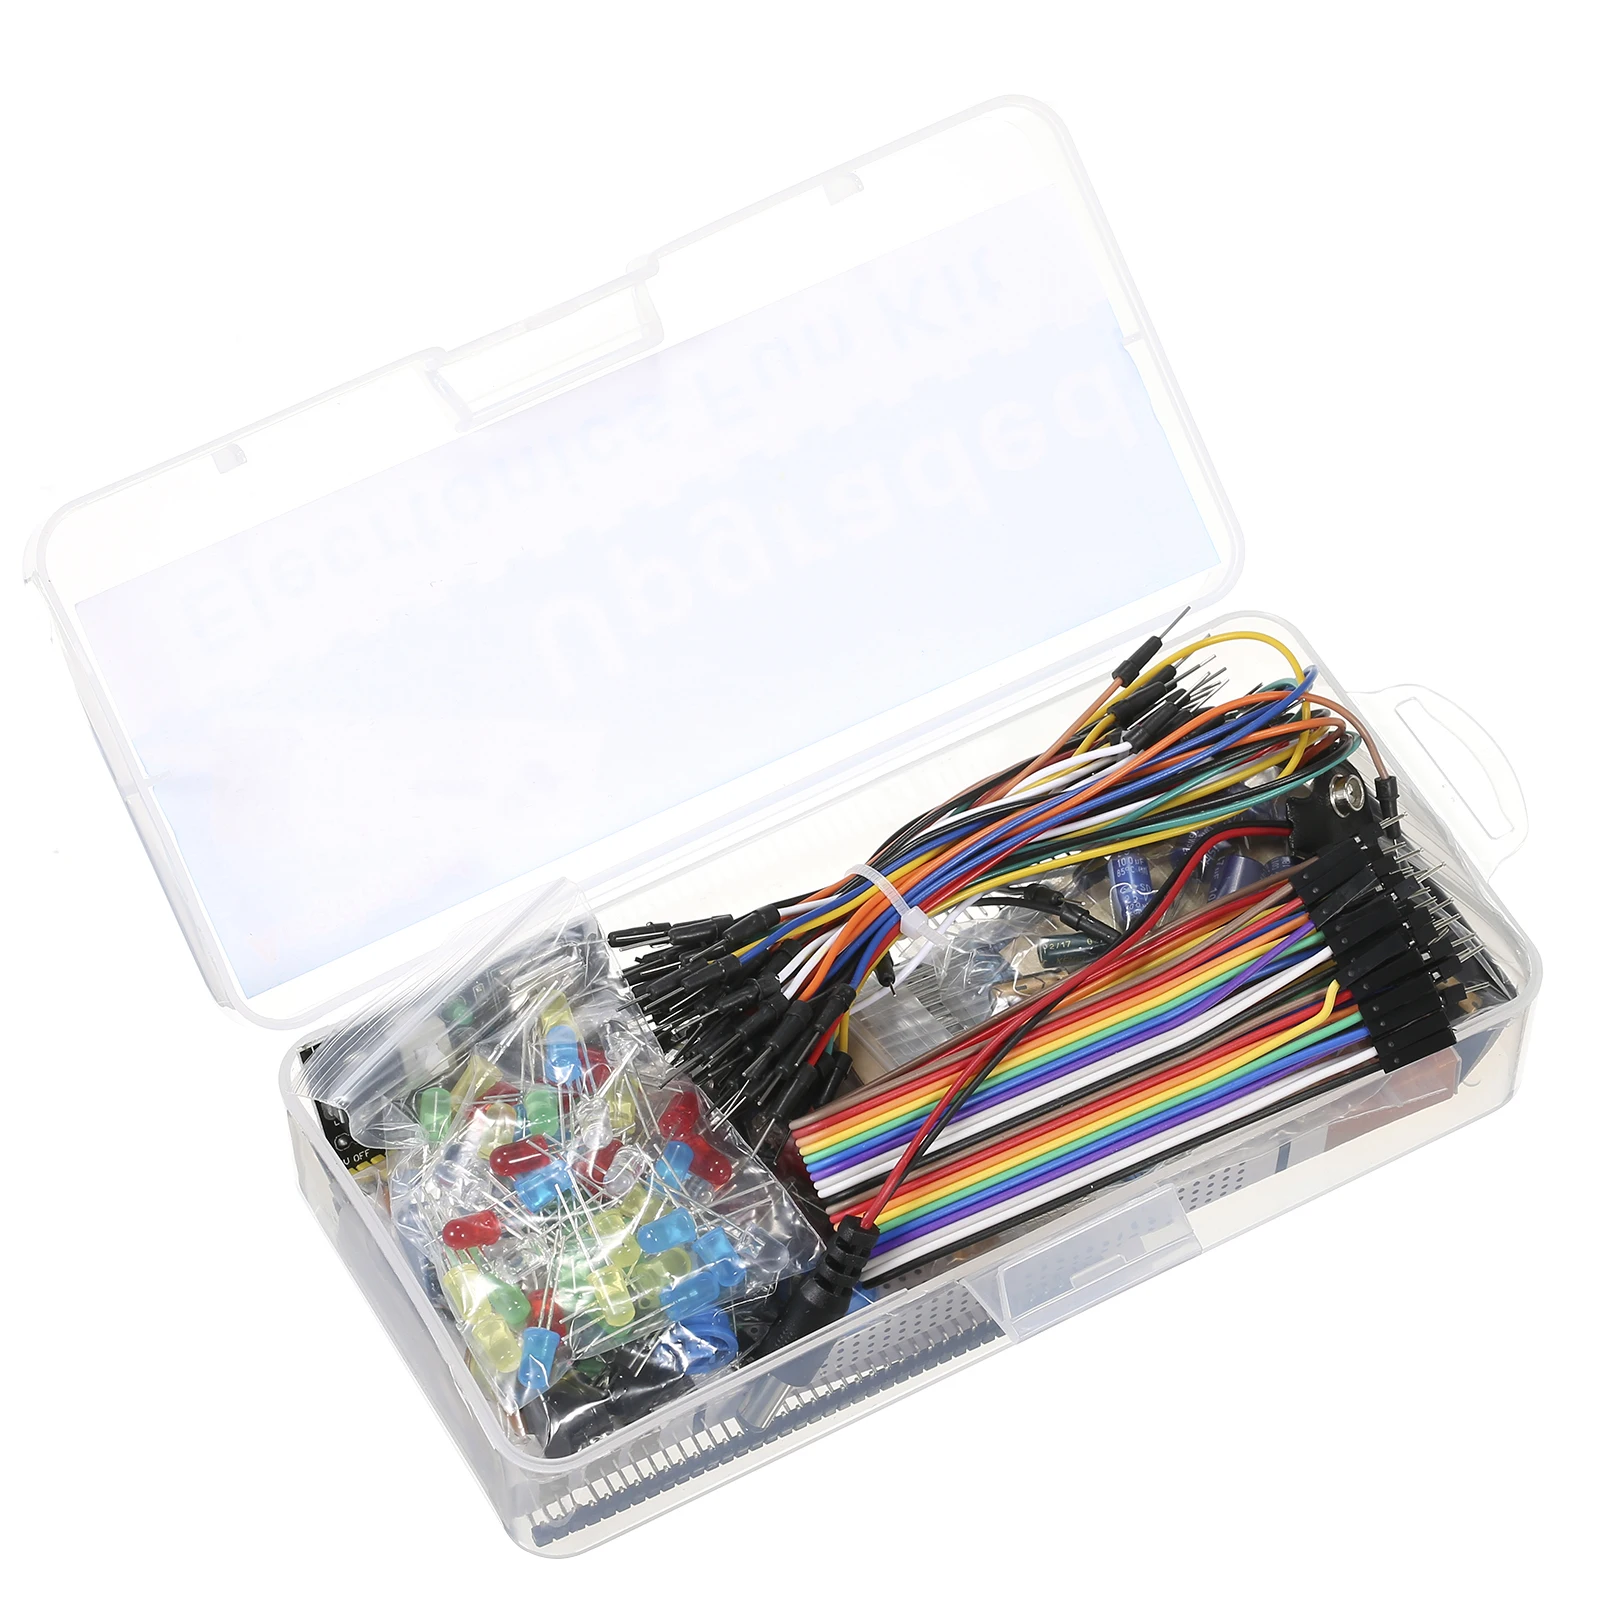 

Electronics Fun Kit with 830 Holes Breadboard Cable Resistor Capacitor Leds Potentiometer Replacement for Arduino UNOR3